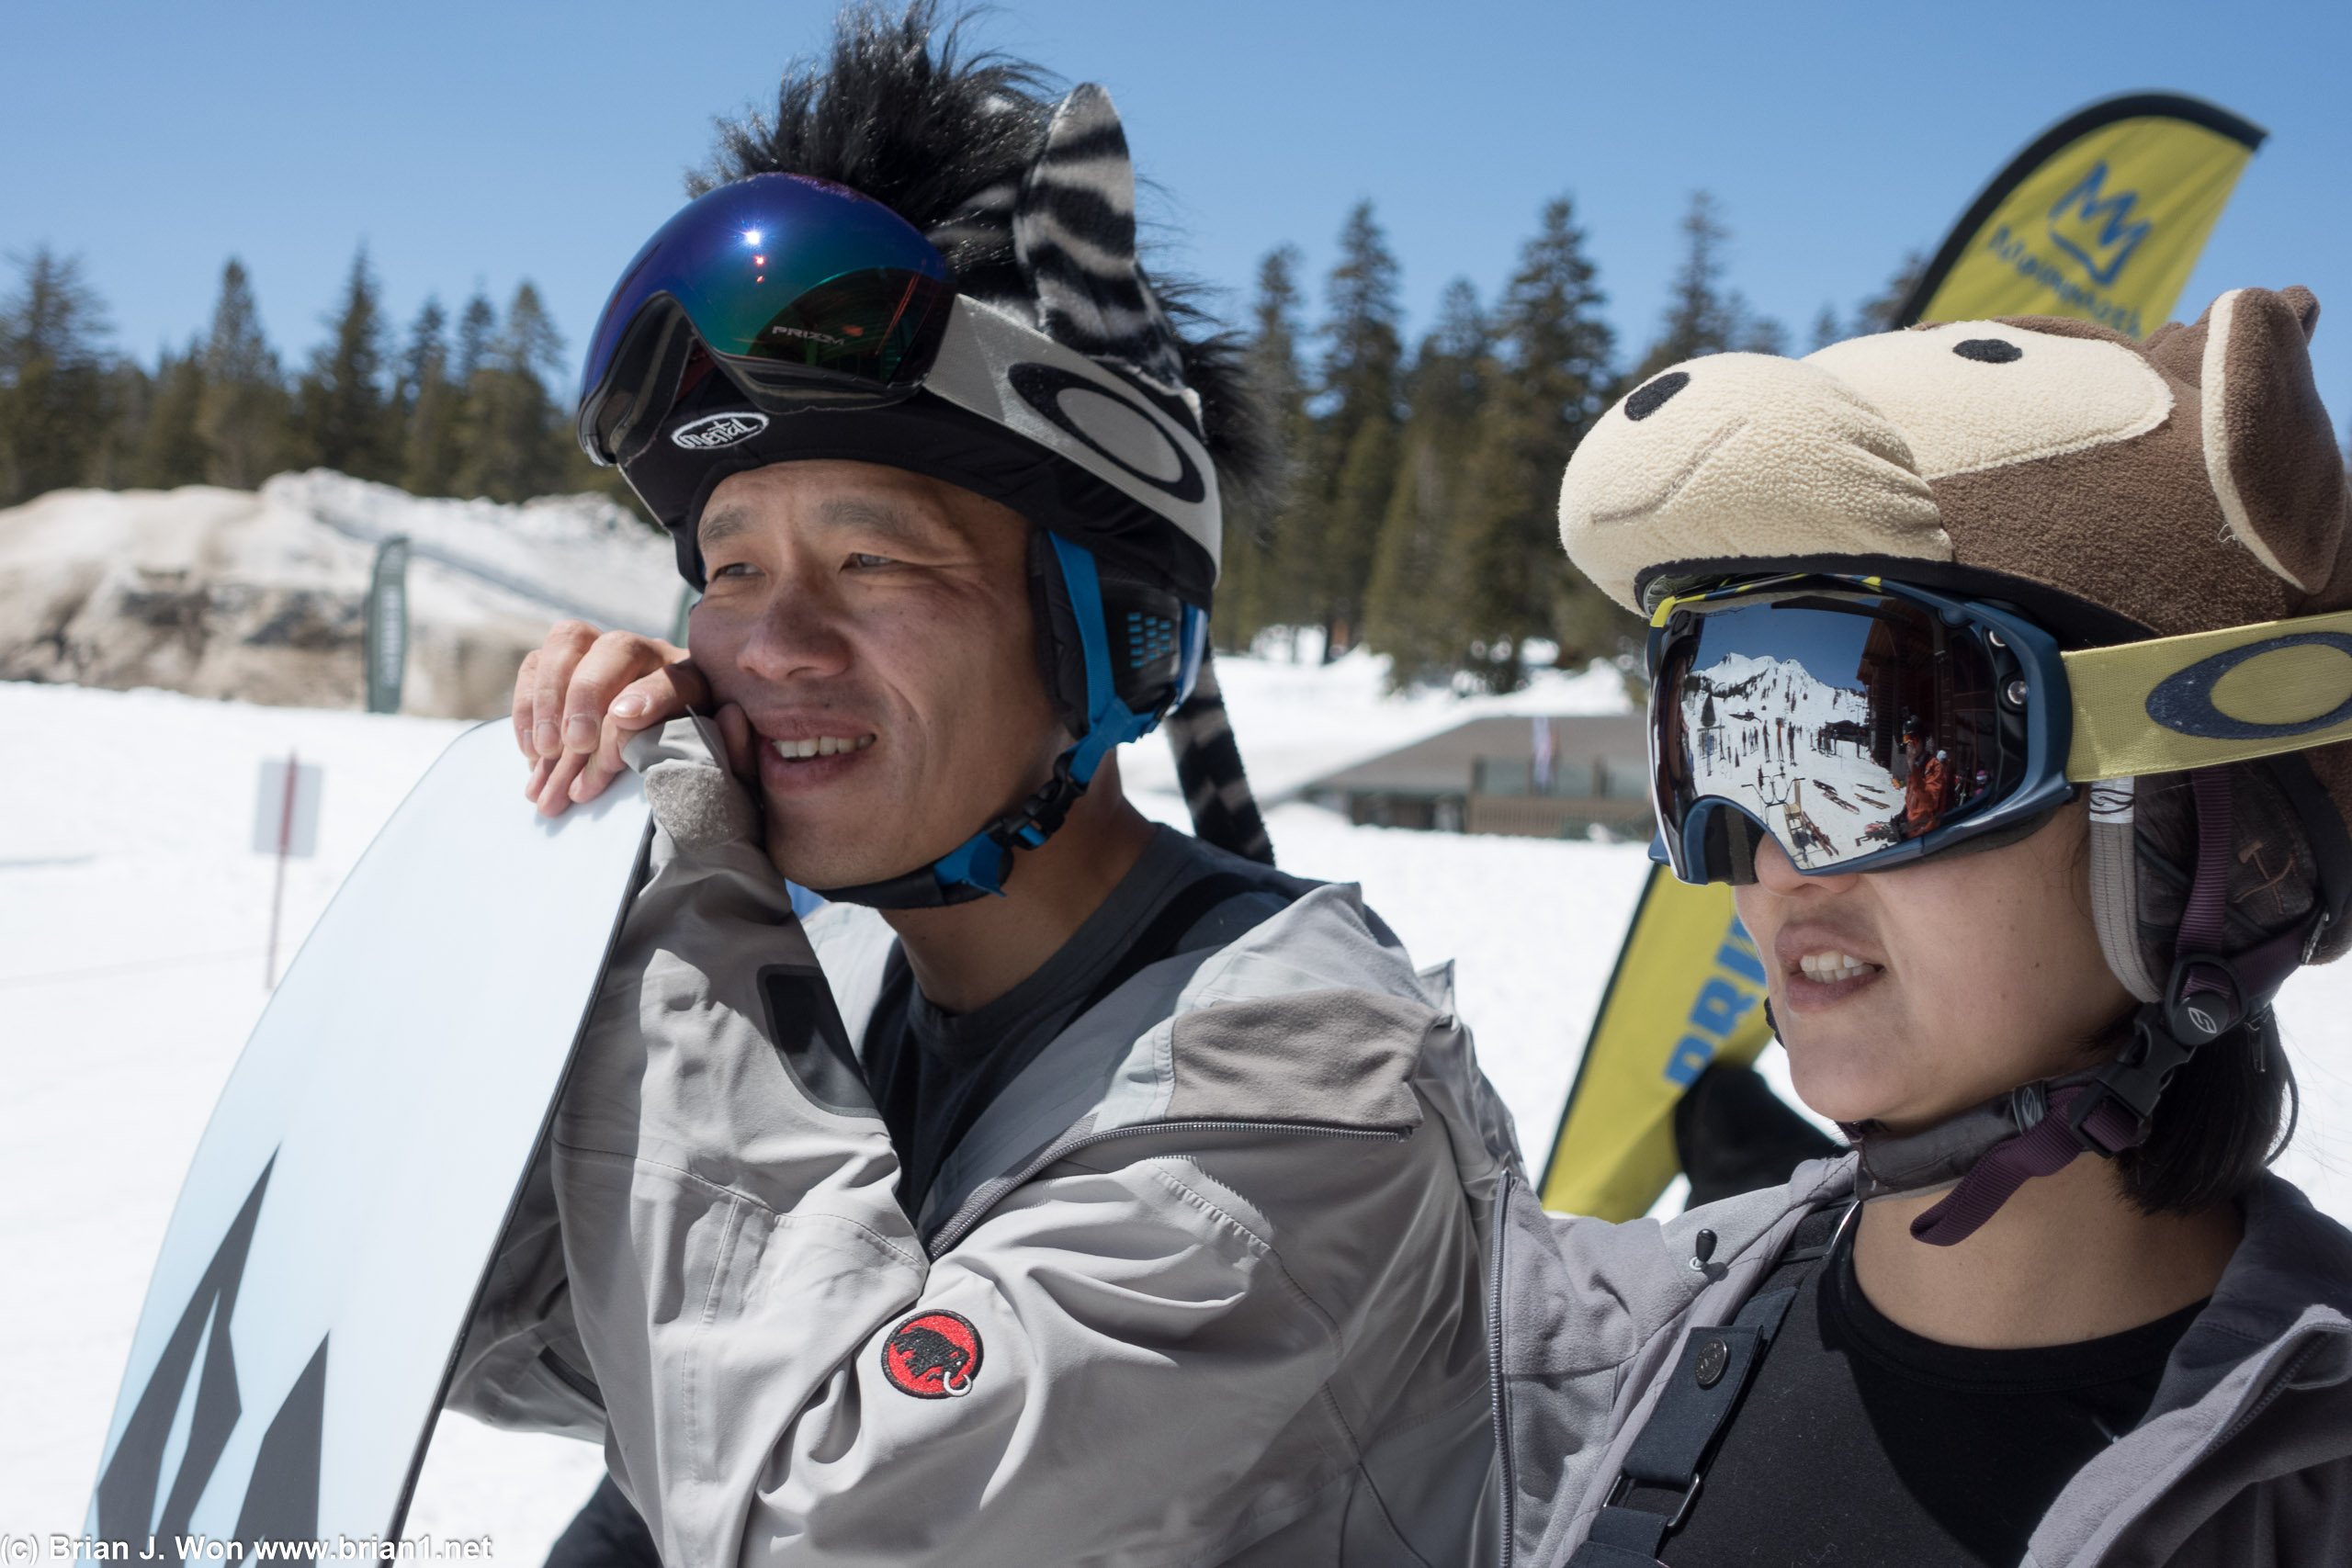 Unsure if the Chen-Wu parents are excited or concerned for their spawn learning to ski.